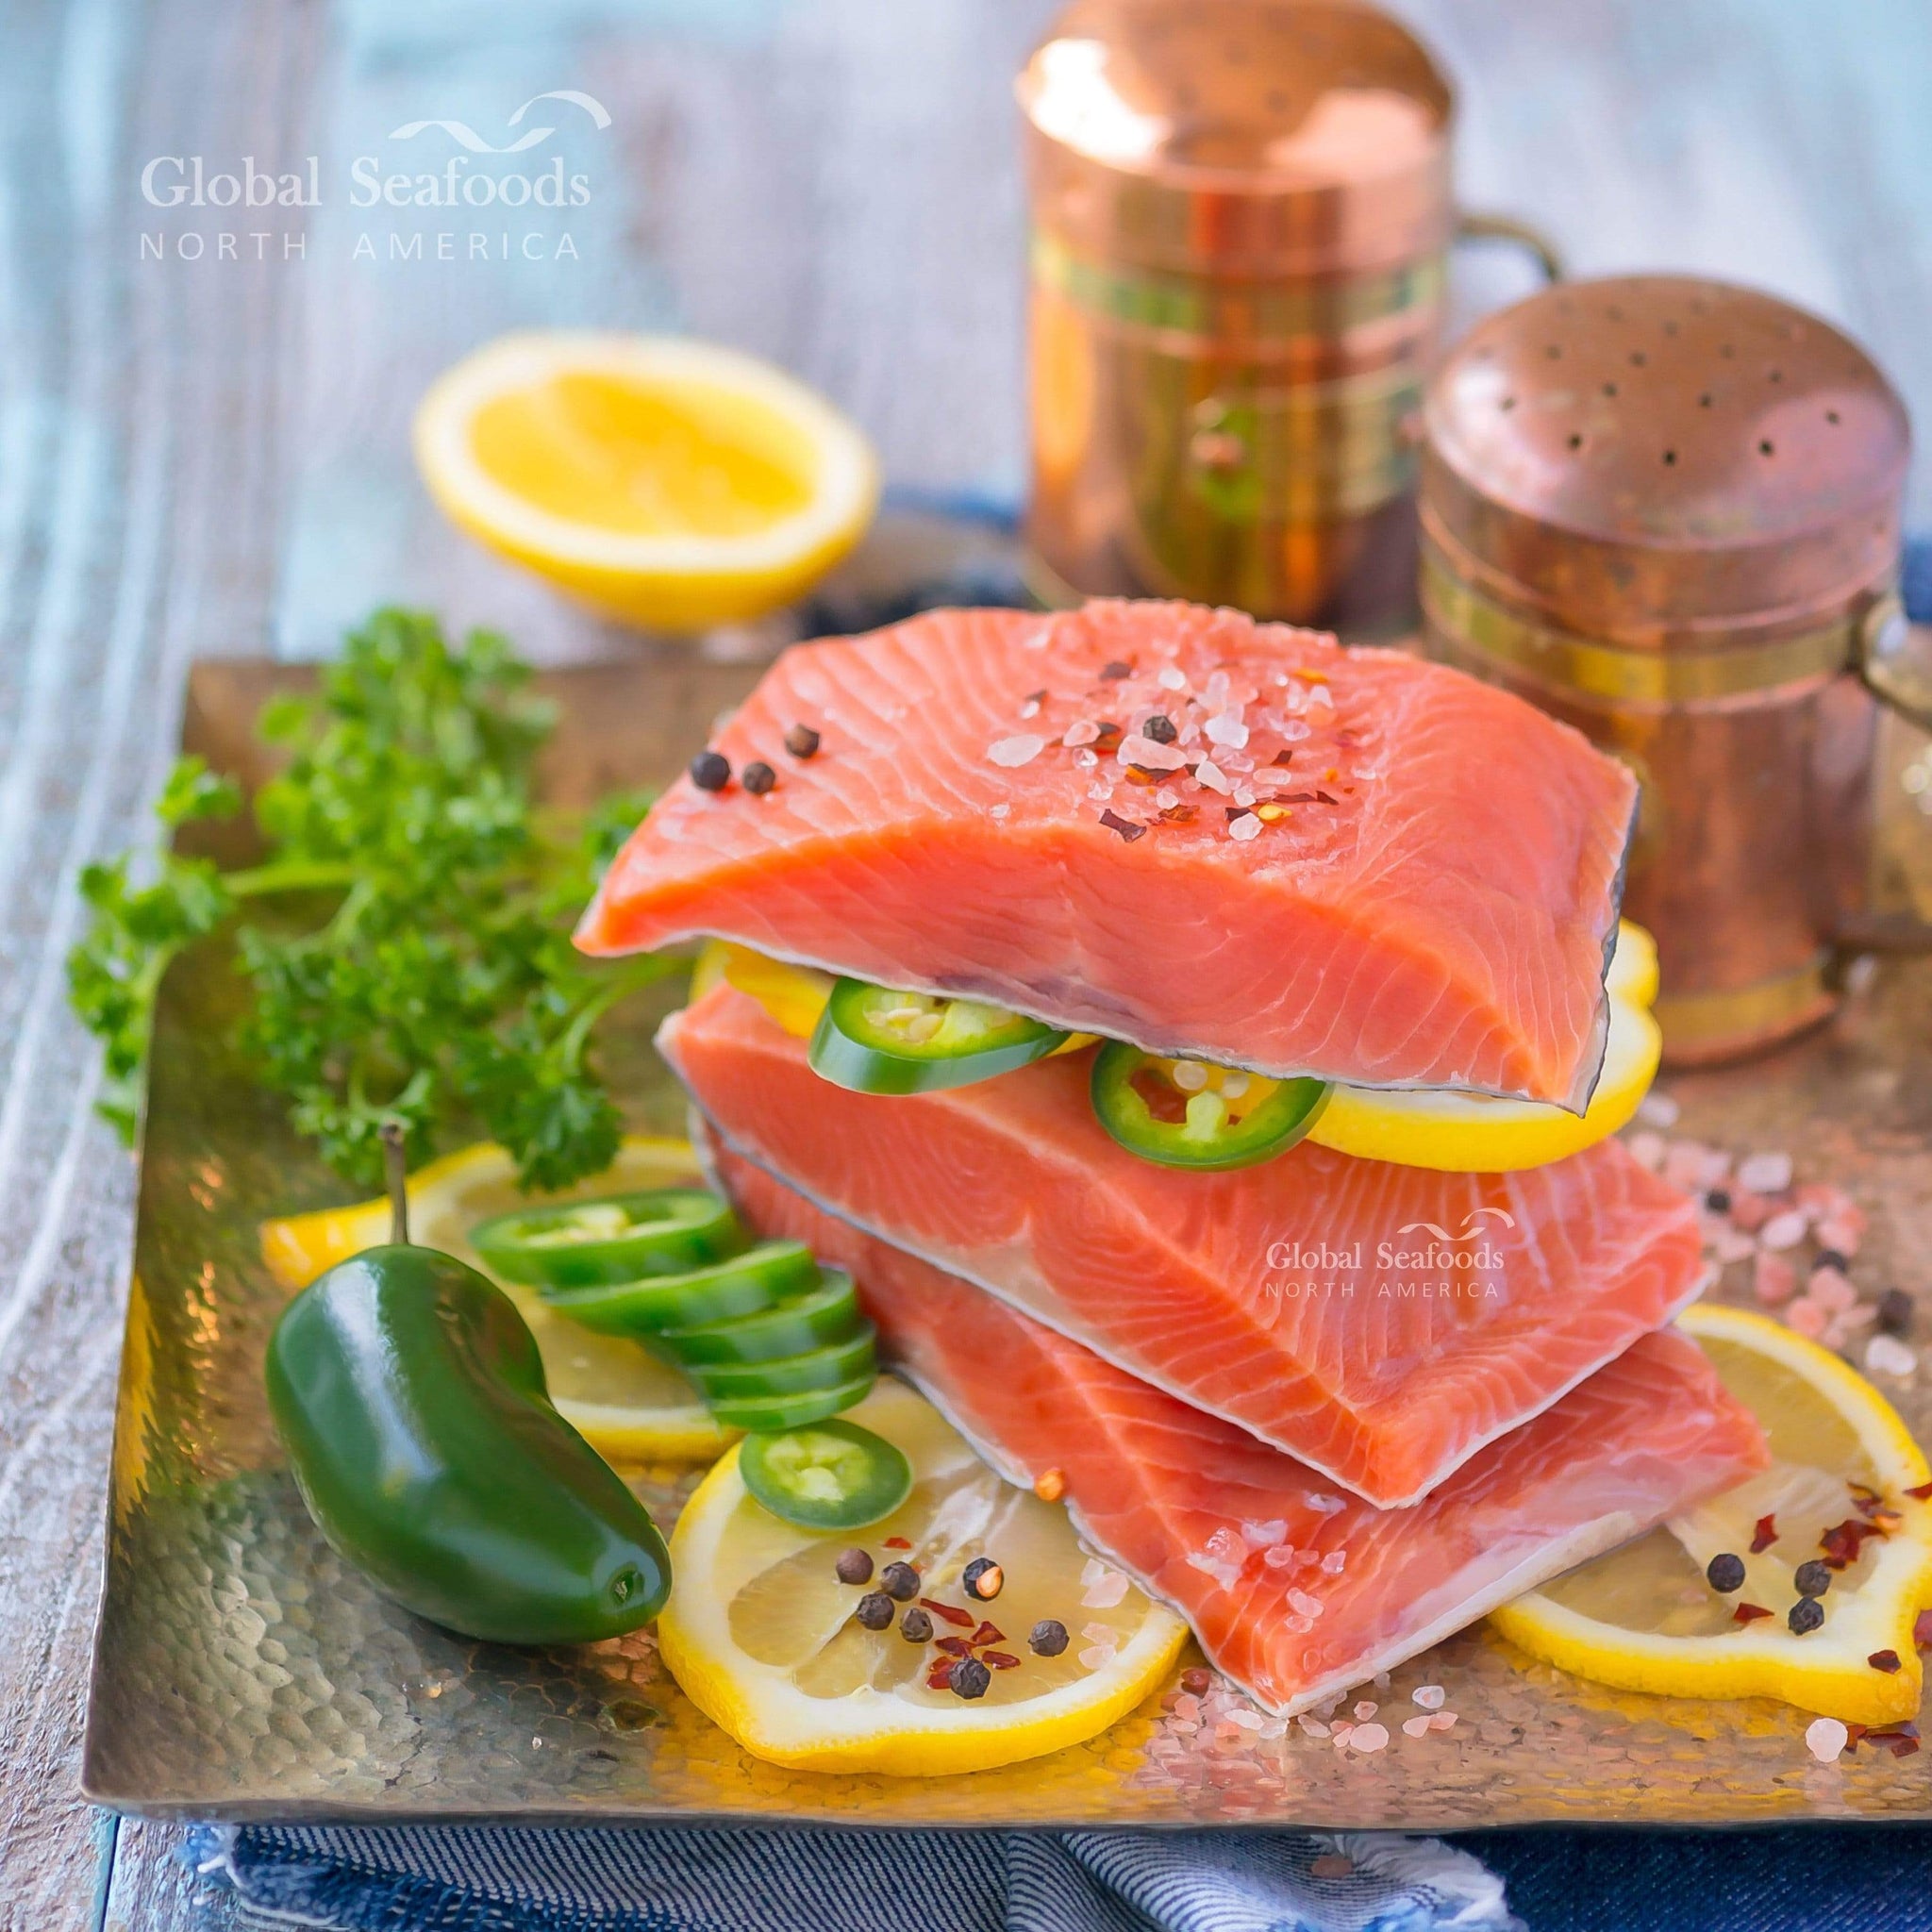 Global Seafoods North America Wild-Caught Alaskan King Salmon Fillets - Nutrient-Rich & Tasty 5 Pounds